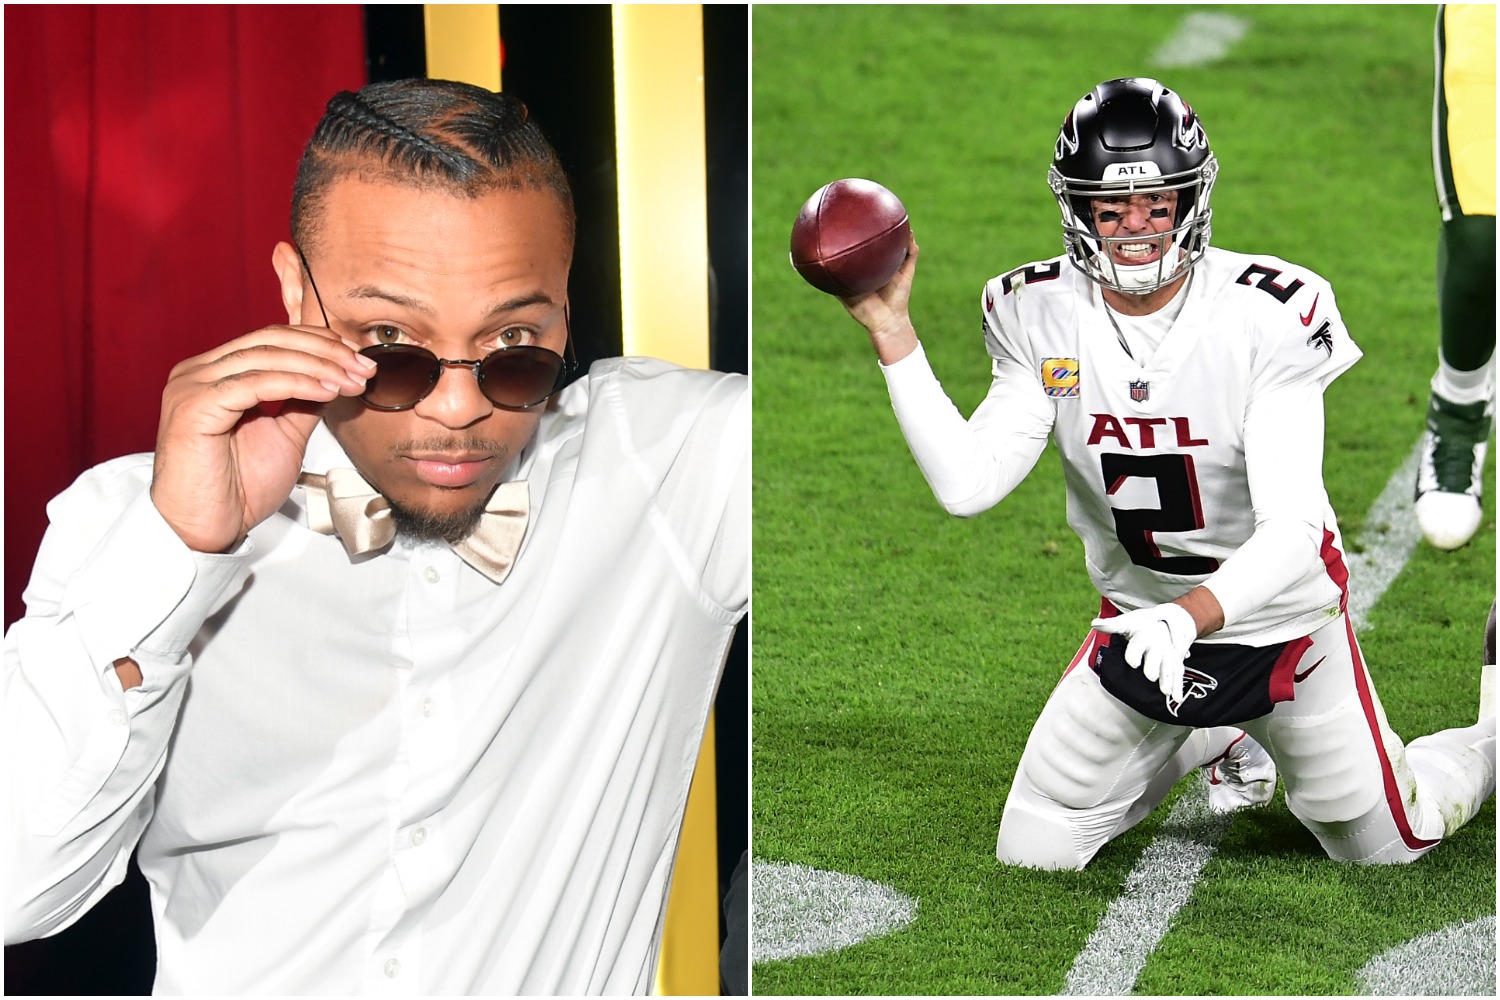 Rapper Bow Wow lowers his sunglasses for a picture as Atlanta Falcons quarterback Matt Ryan gets sacked.